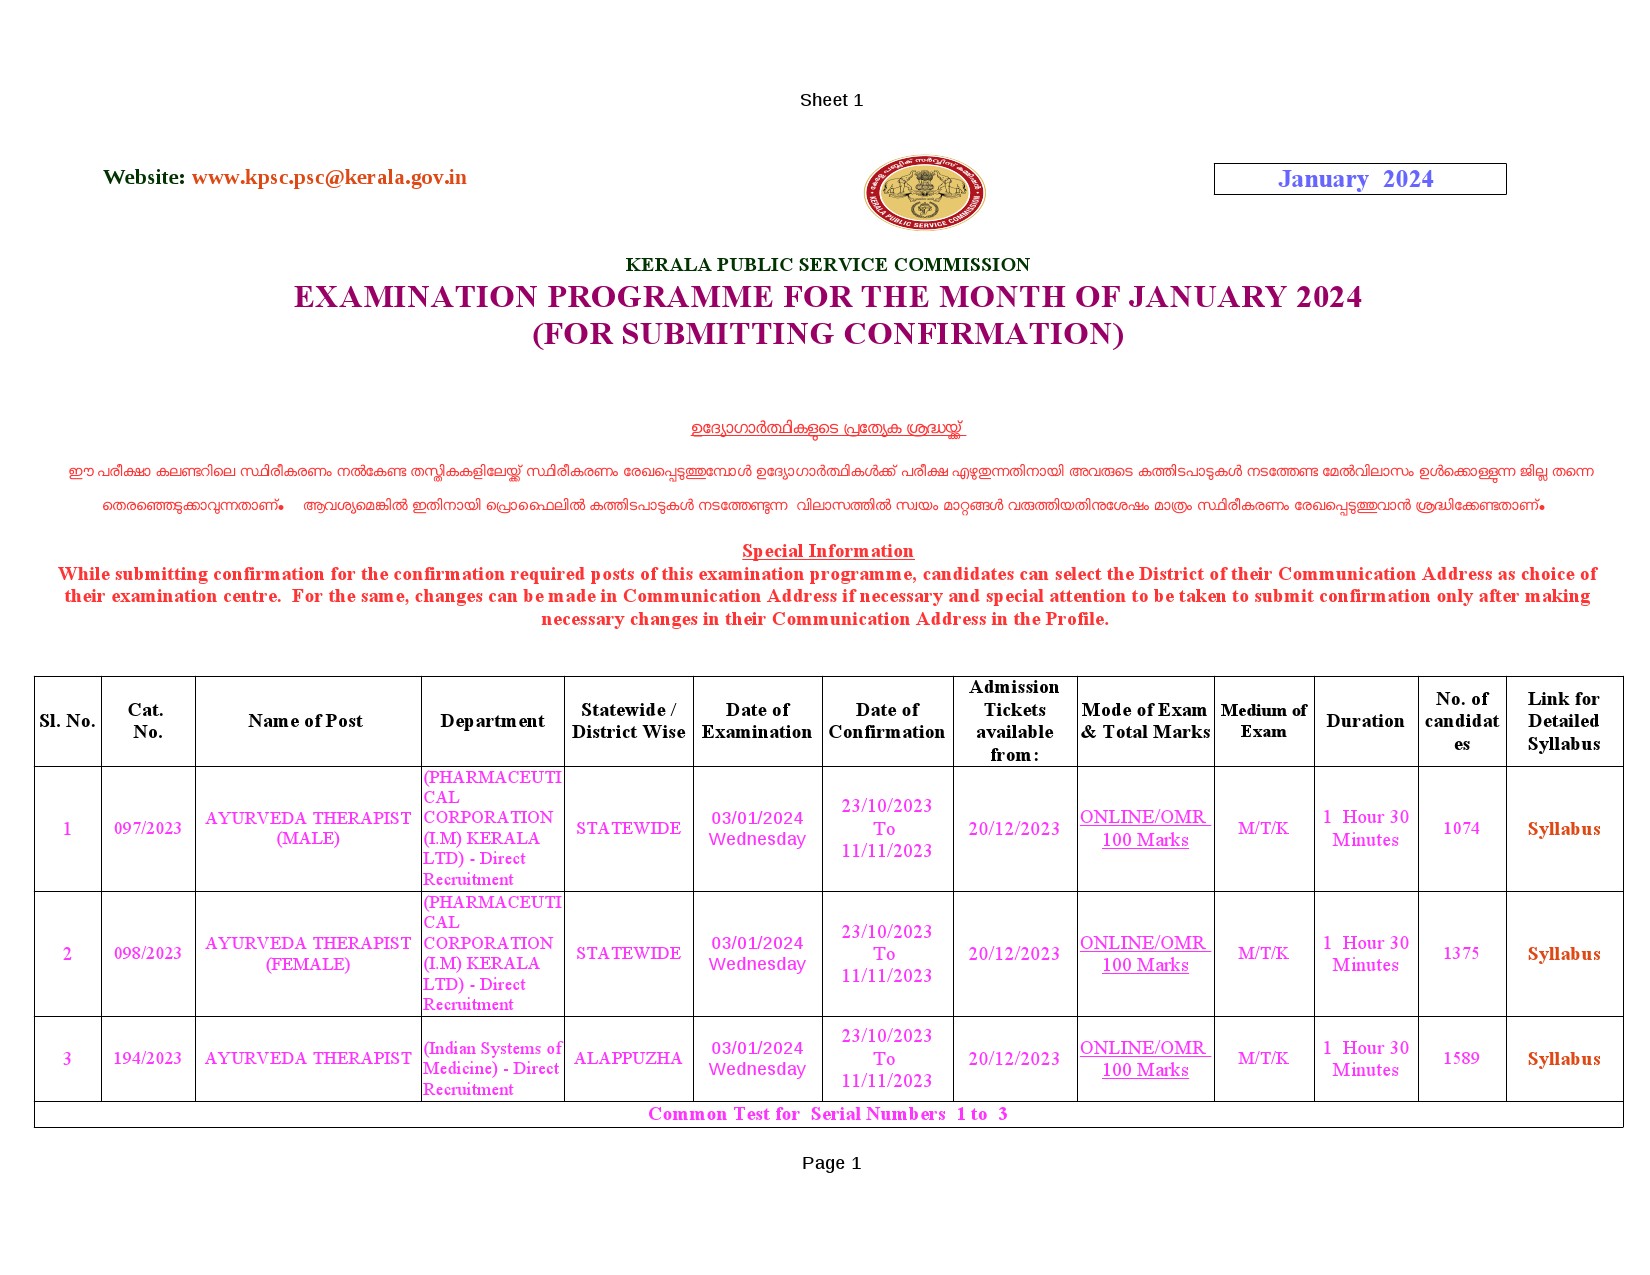 Examination Programme For The Month Of January 2024 - Notification Image 1